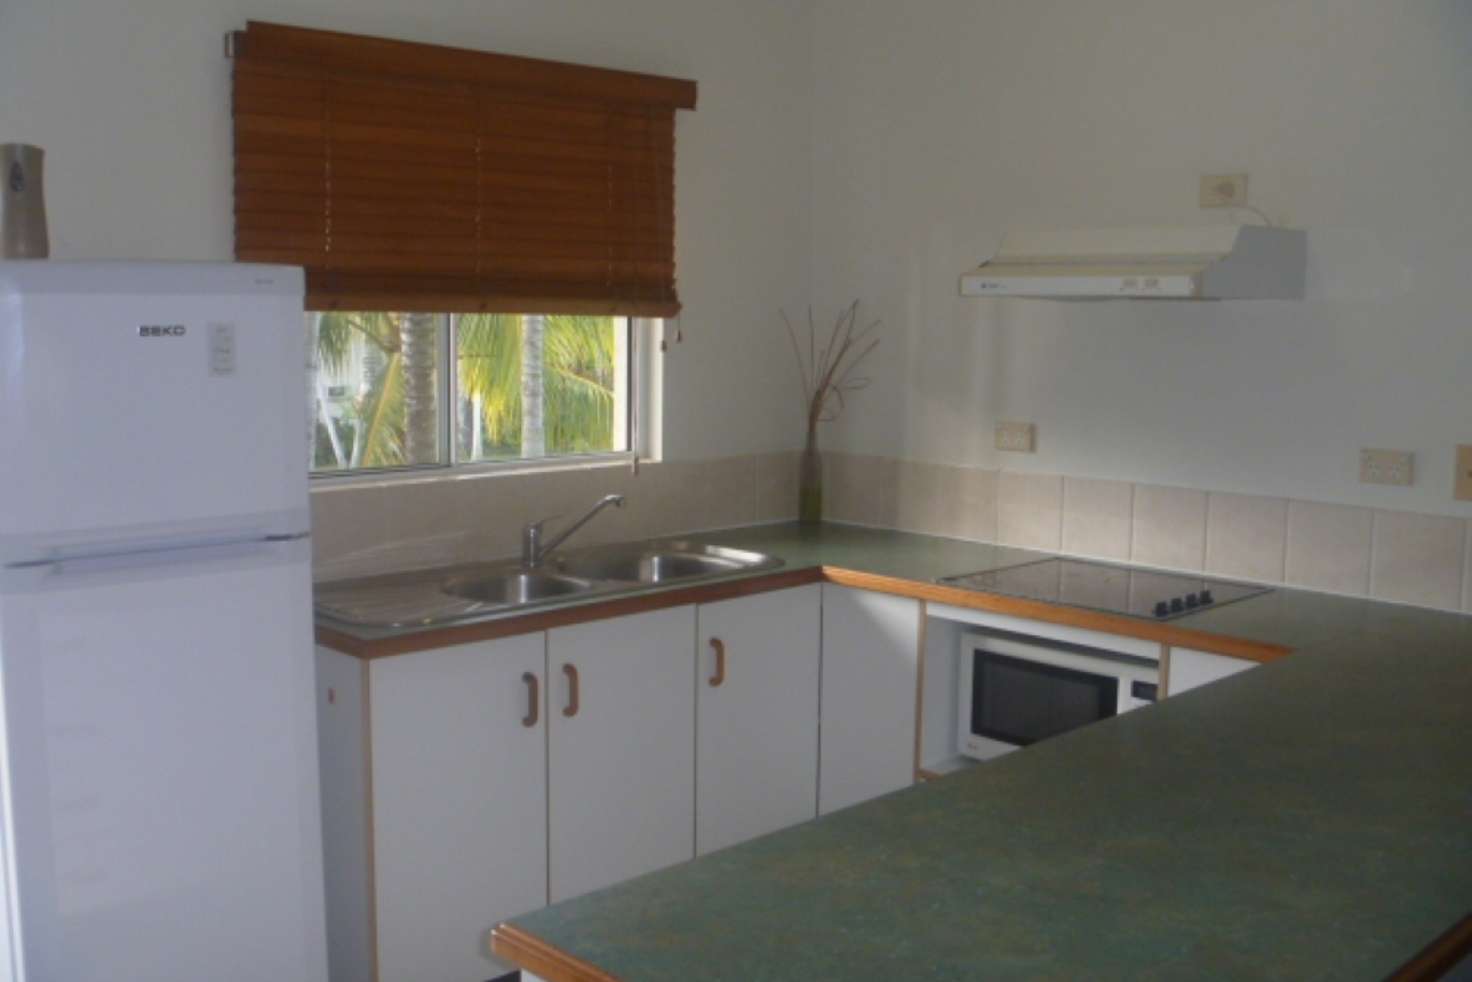 Main view of Homely apartment listing, 44/1 Downing Street, Craiglie QLD 4877